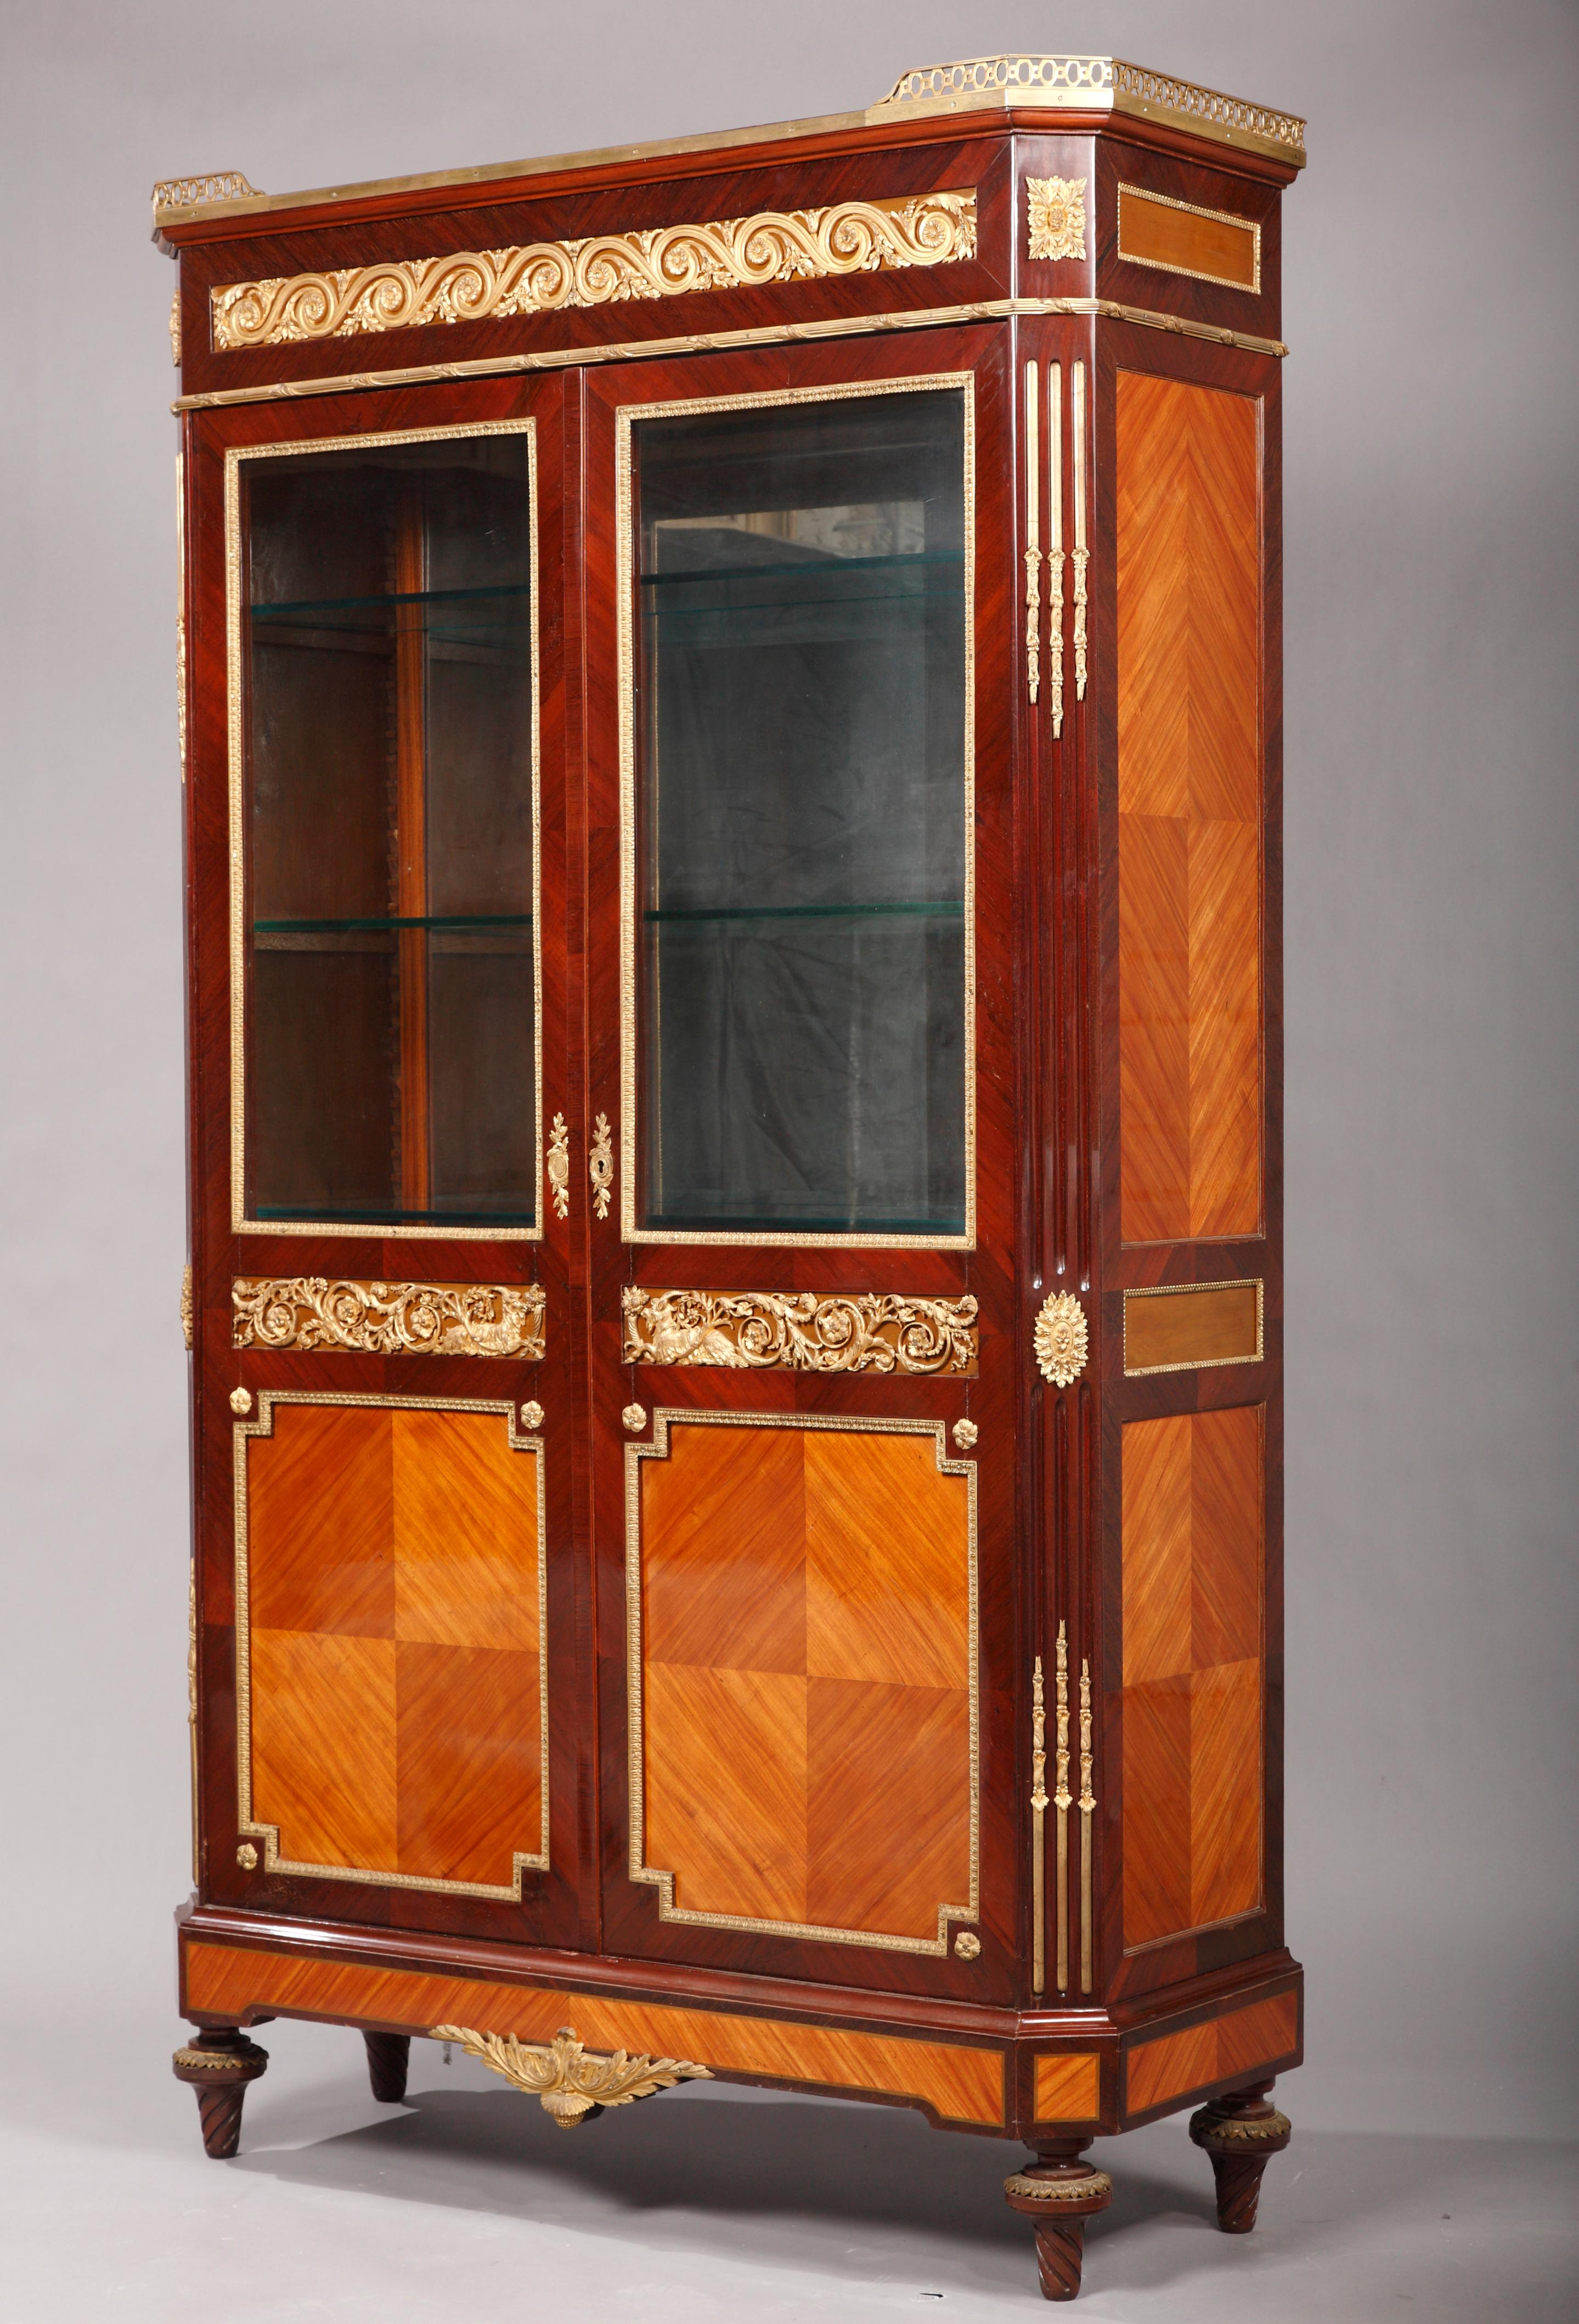 A Louis XVI style vitrine in veneered wood. With two doors glazed at the upper part, opening onto four glass shelves and two drawers. Inner backside fitted with a large mirror. Nicely ornated with rhombus motif on the lower part of the doors as well